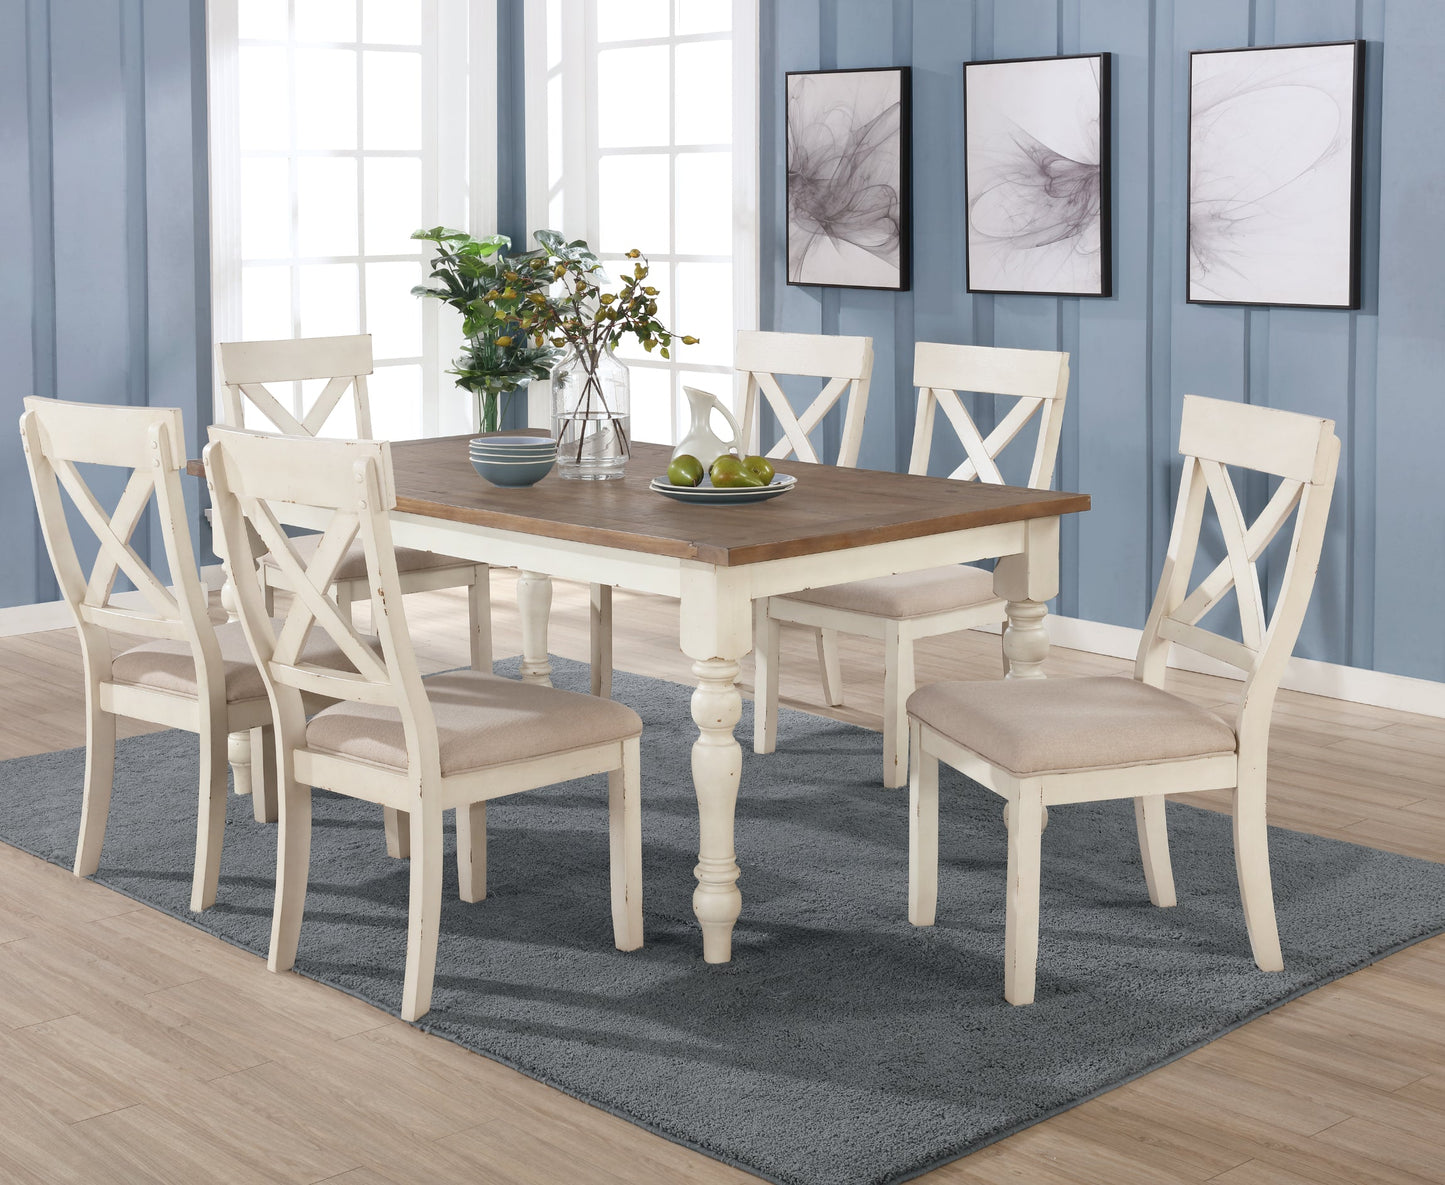 Prato 7-piece Dining Table Set With Cross Back Chairs, Antique White and Distressed Oak